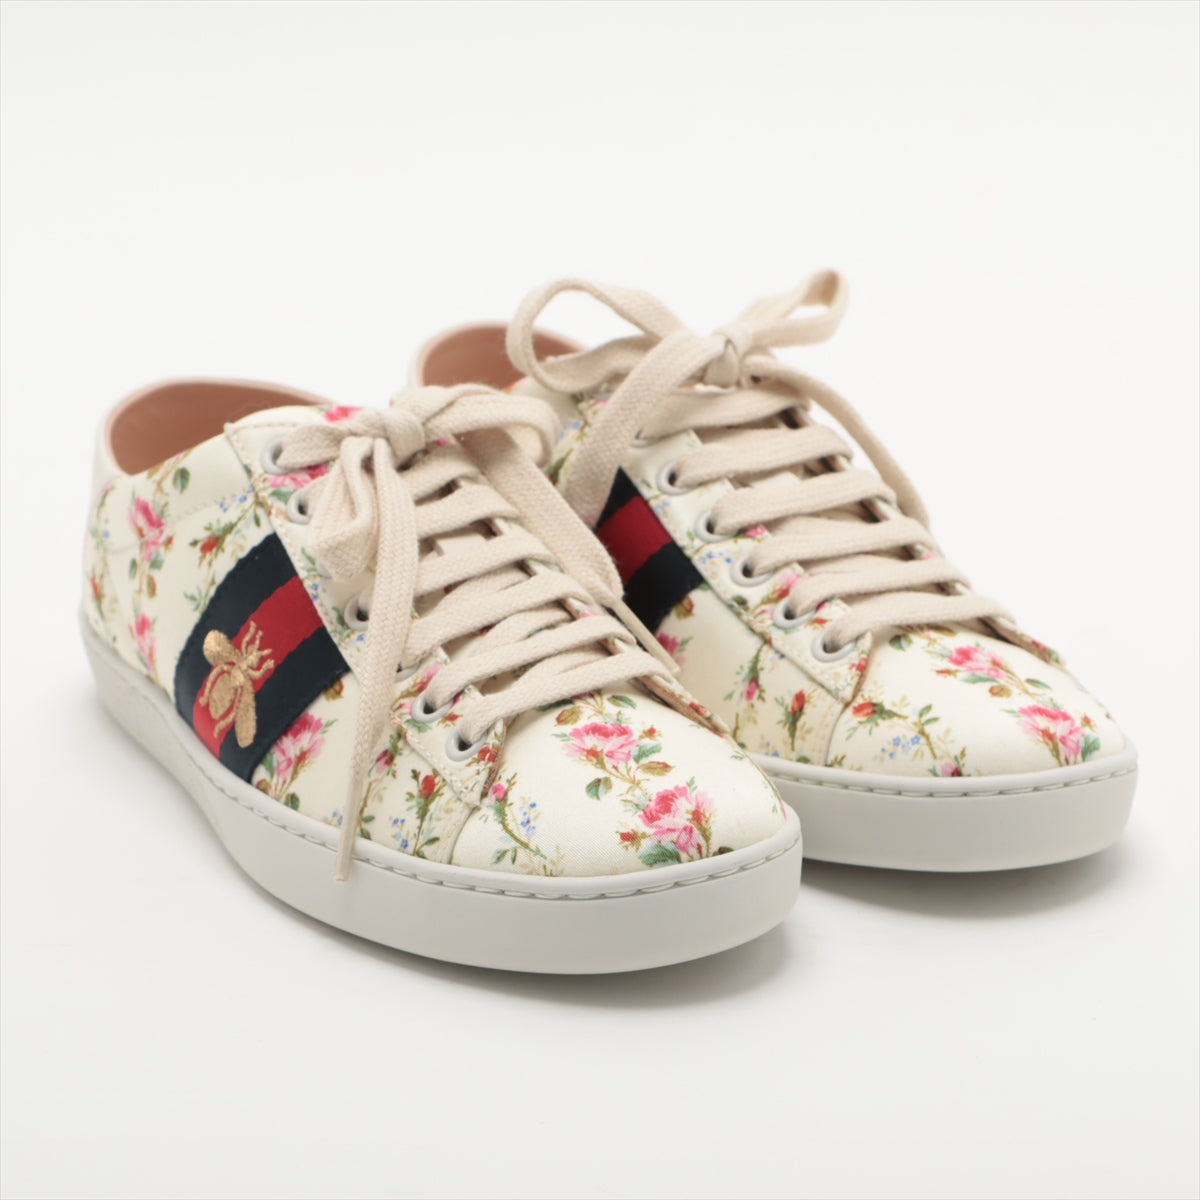 Gucci ACE Leather x fabric Sneakers 34 Ladies' Multicolor 470011 Bee Embroidery floral